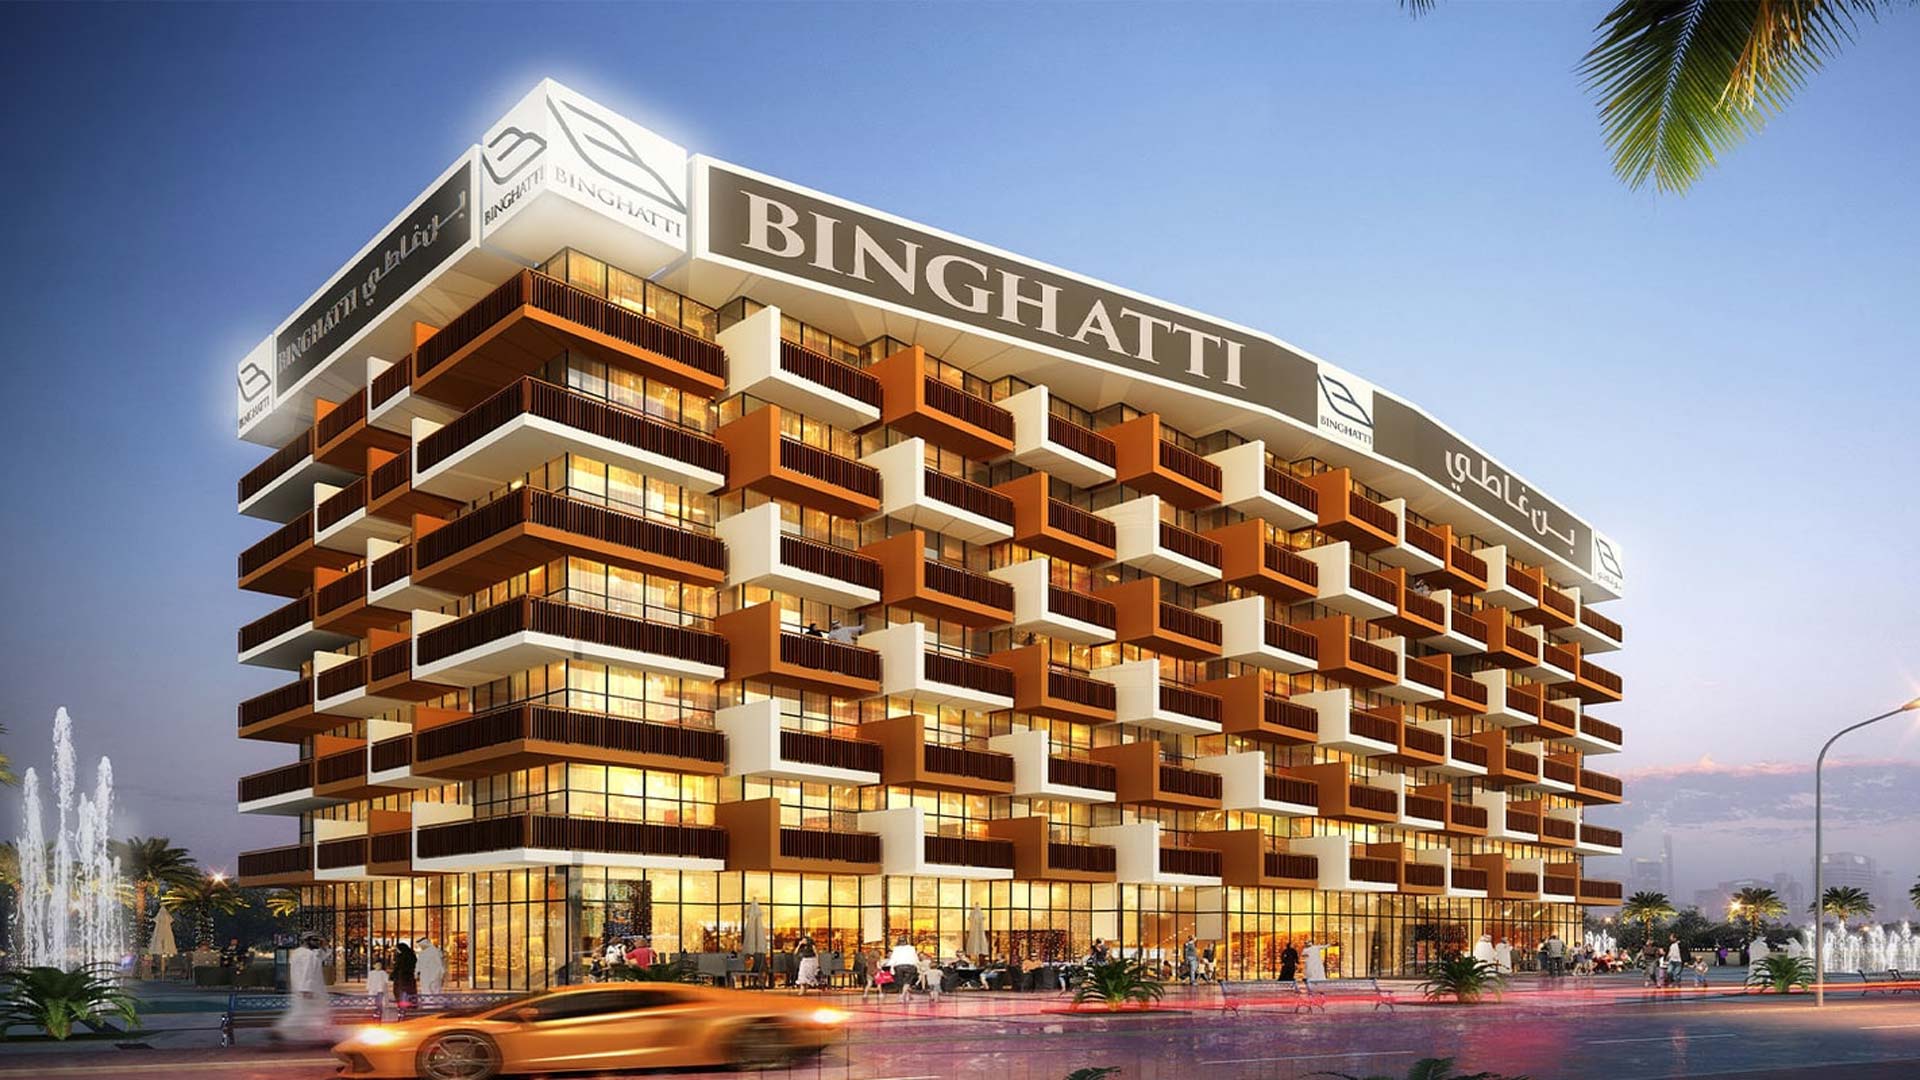 BINGHATTI EAST AND WEST APARTMENTS - 1